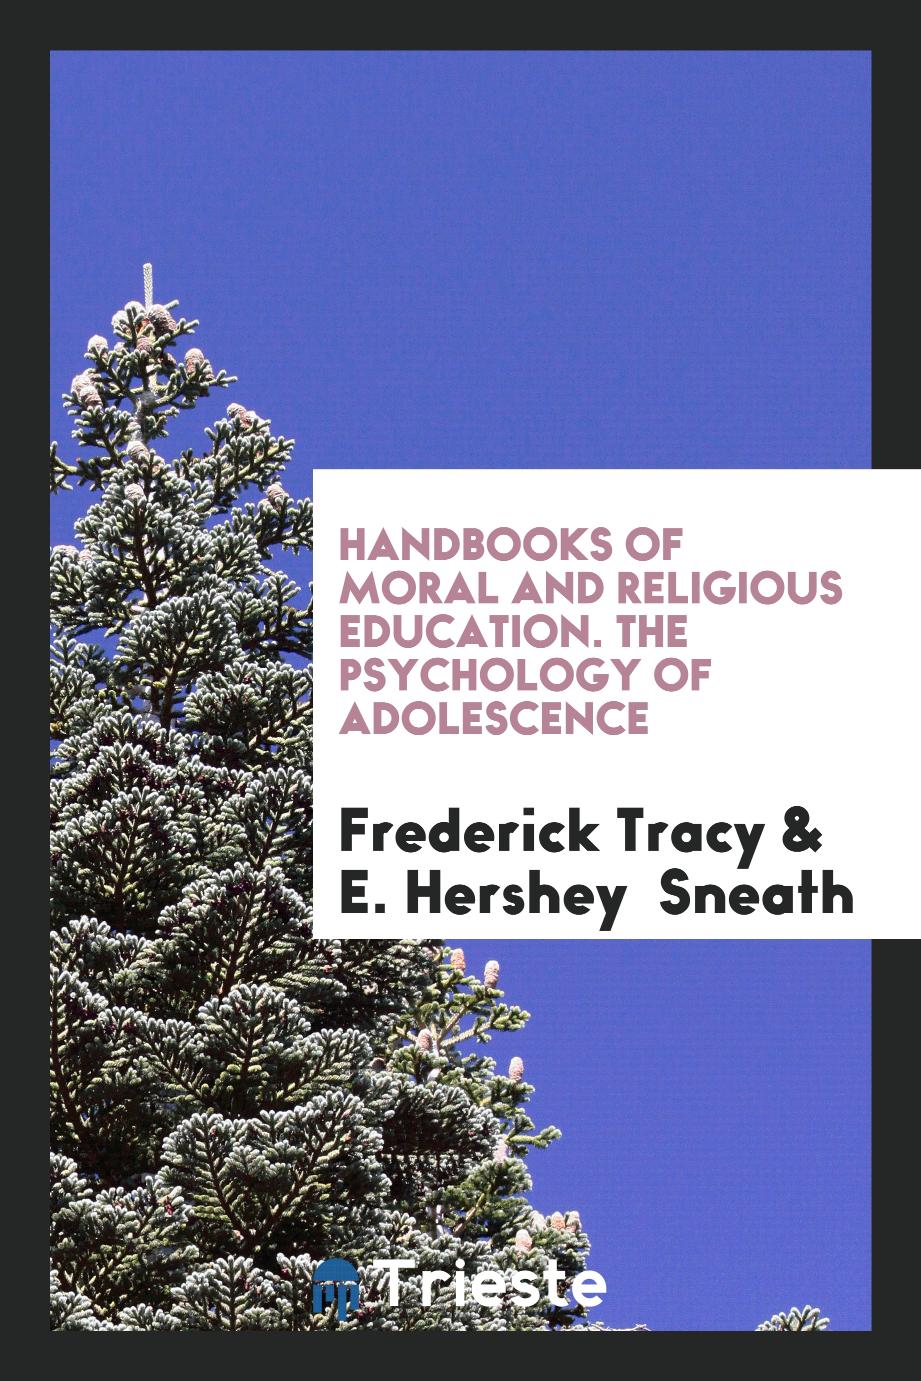 Handbooks of Moral and Religious Education. The Psychology of Adolescence